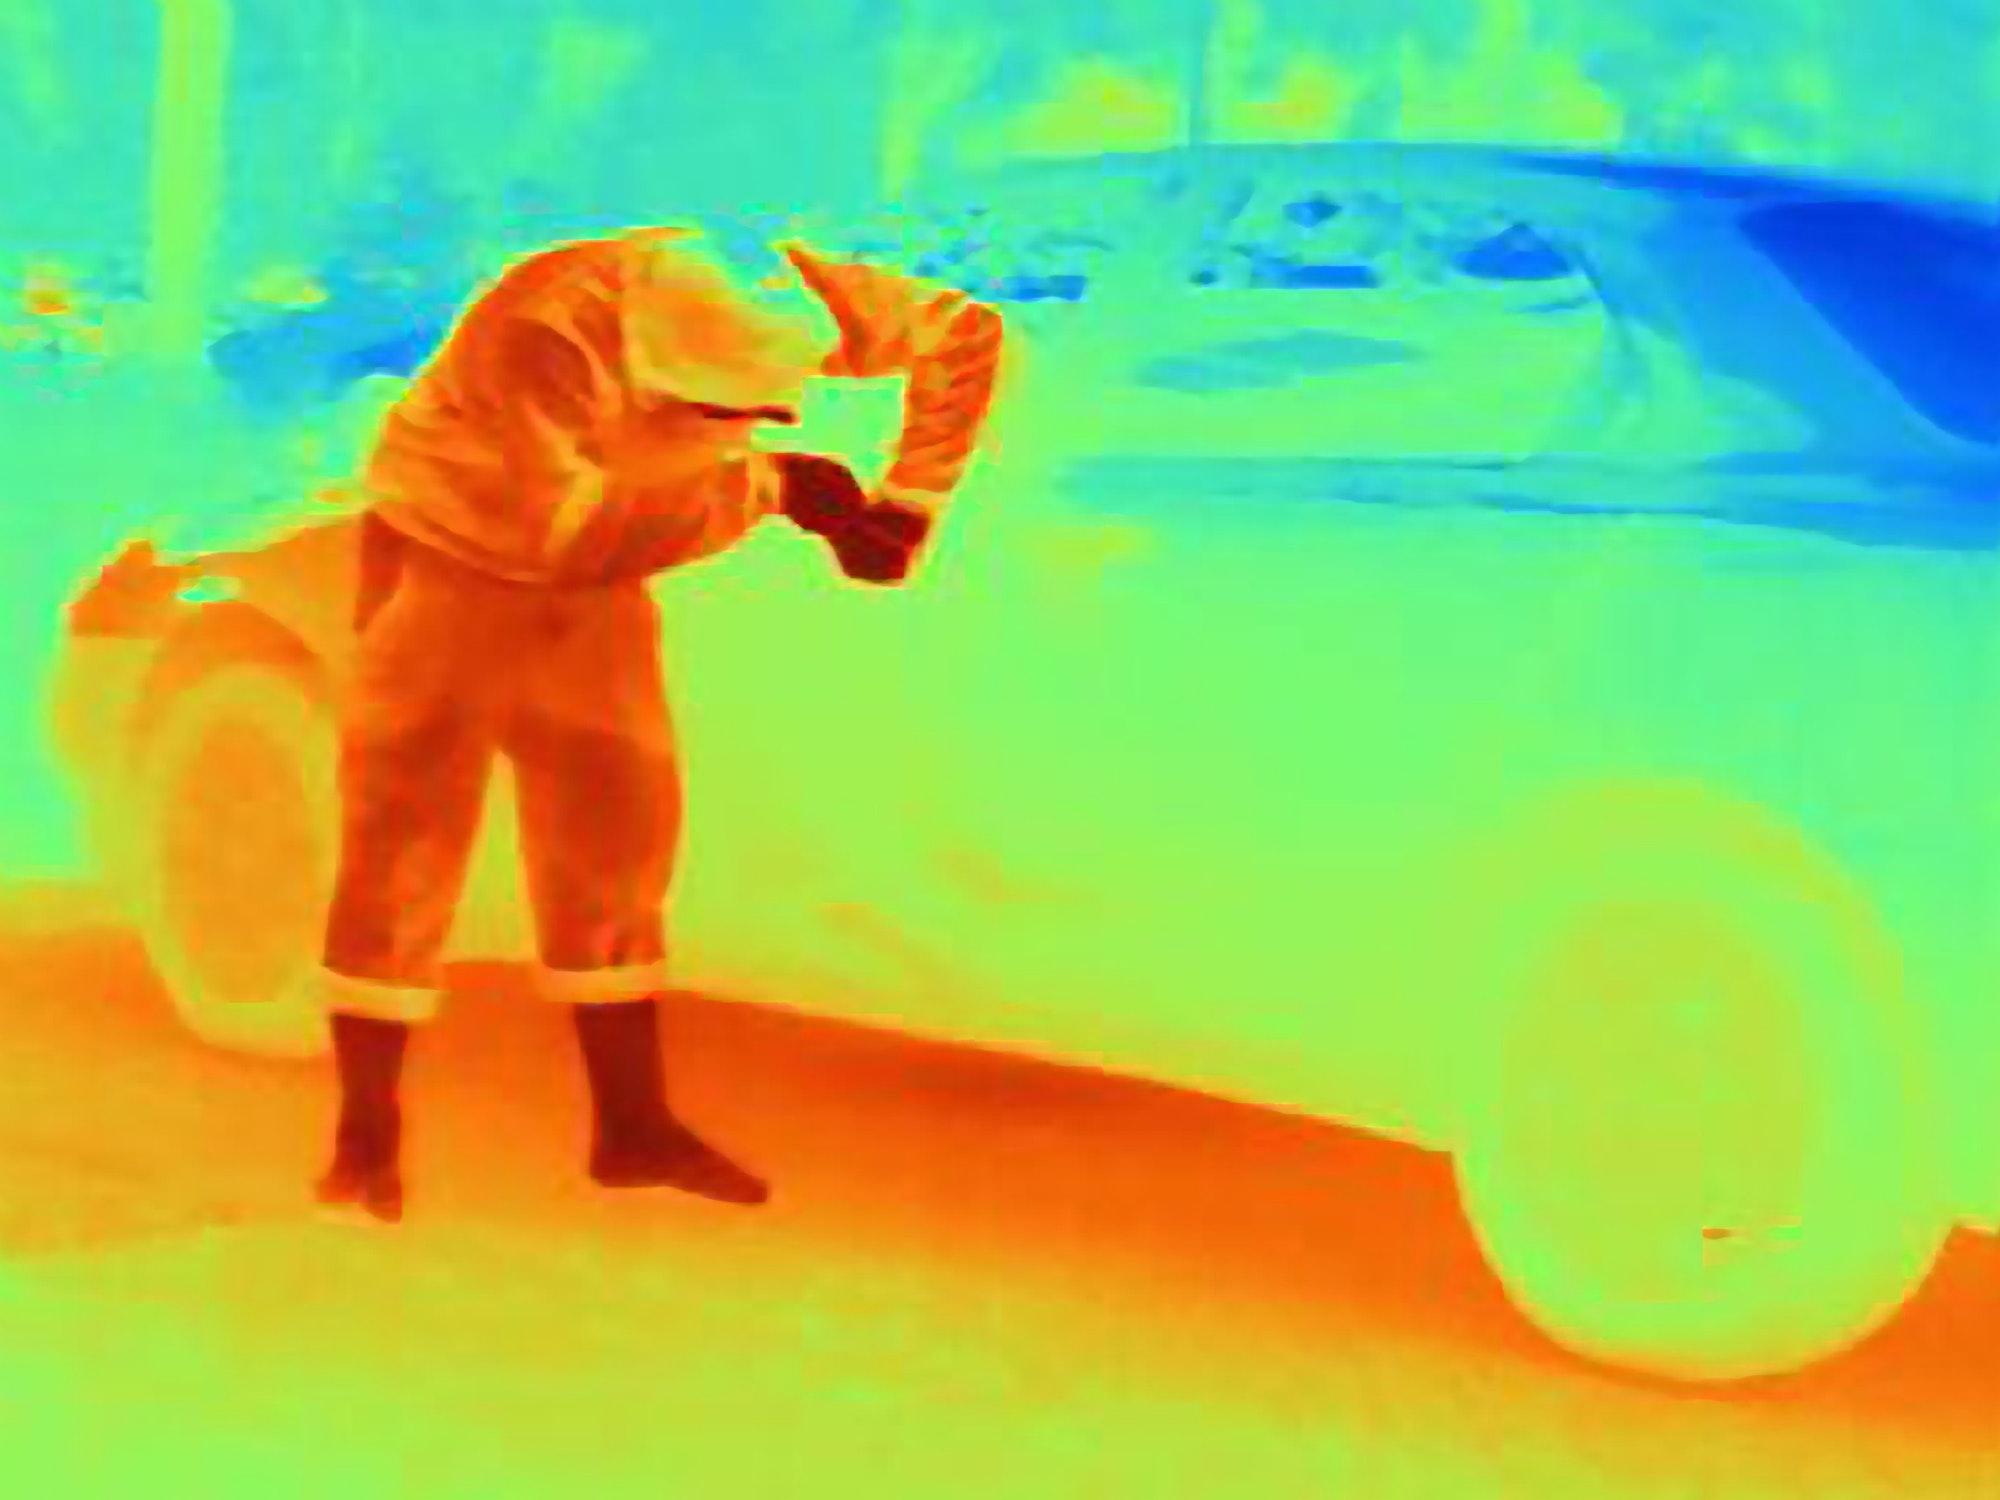 Thermal photograph of a burglar breaking into a car